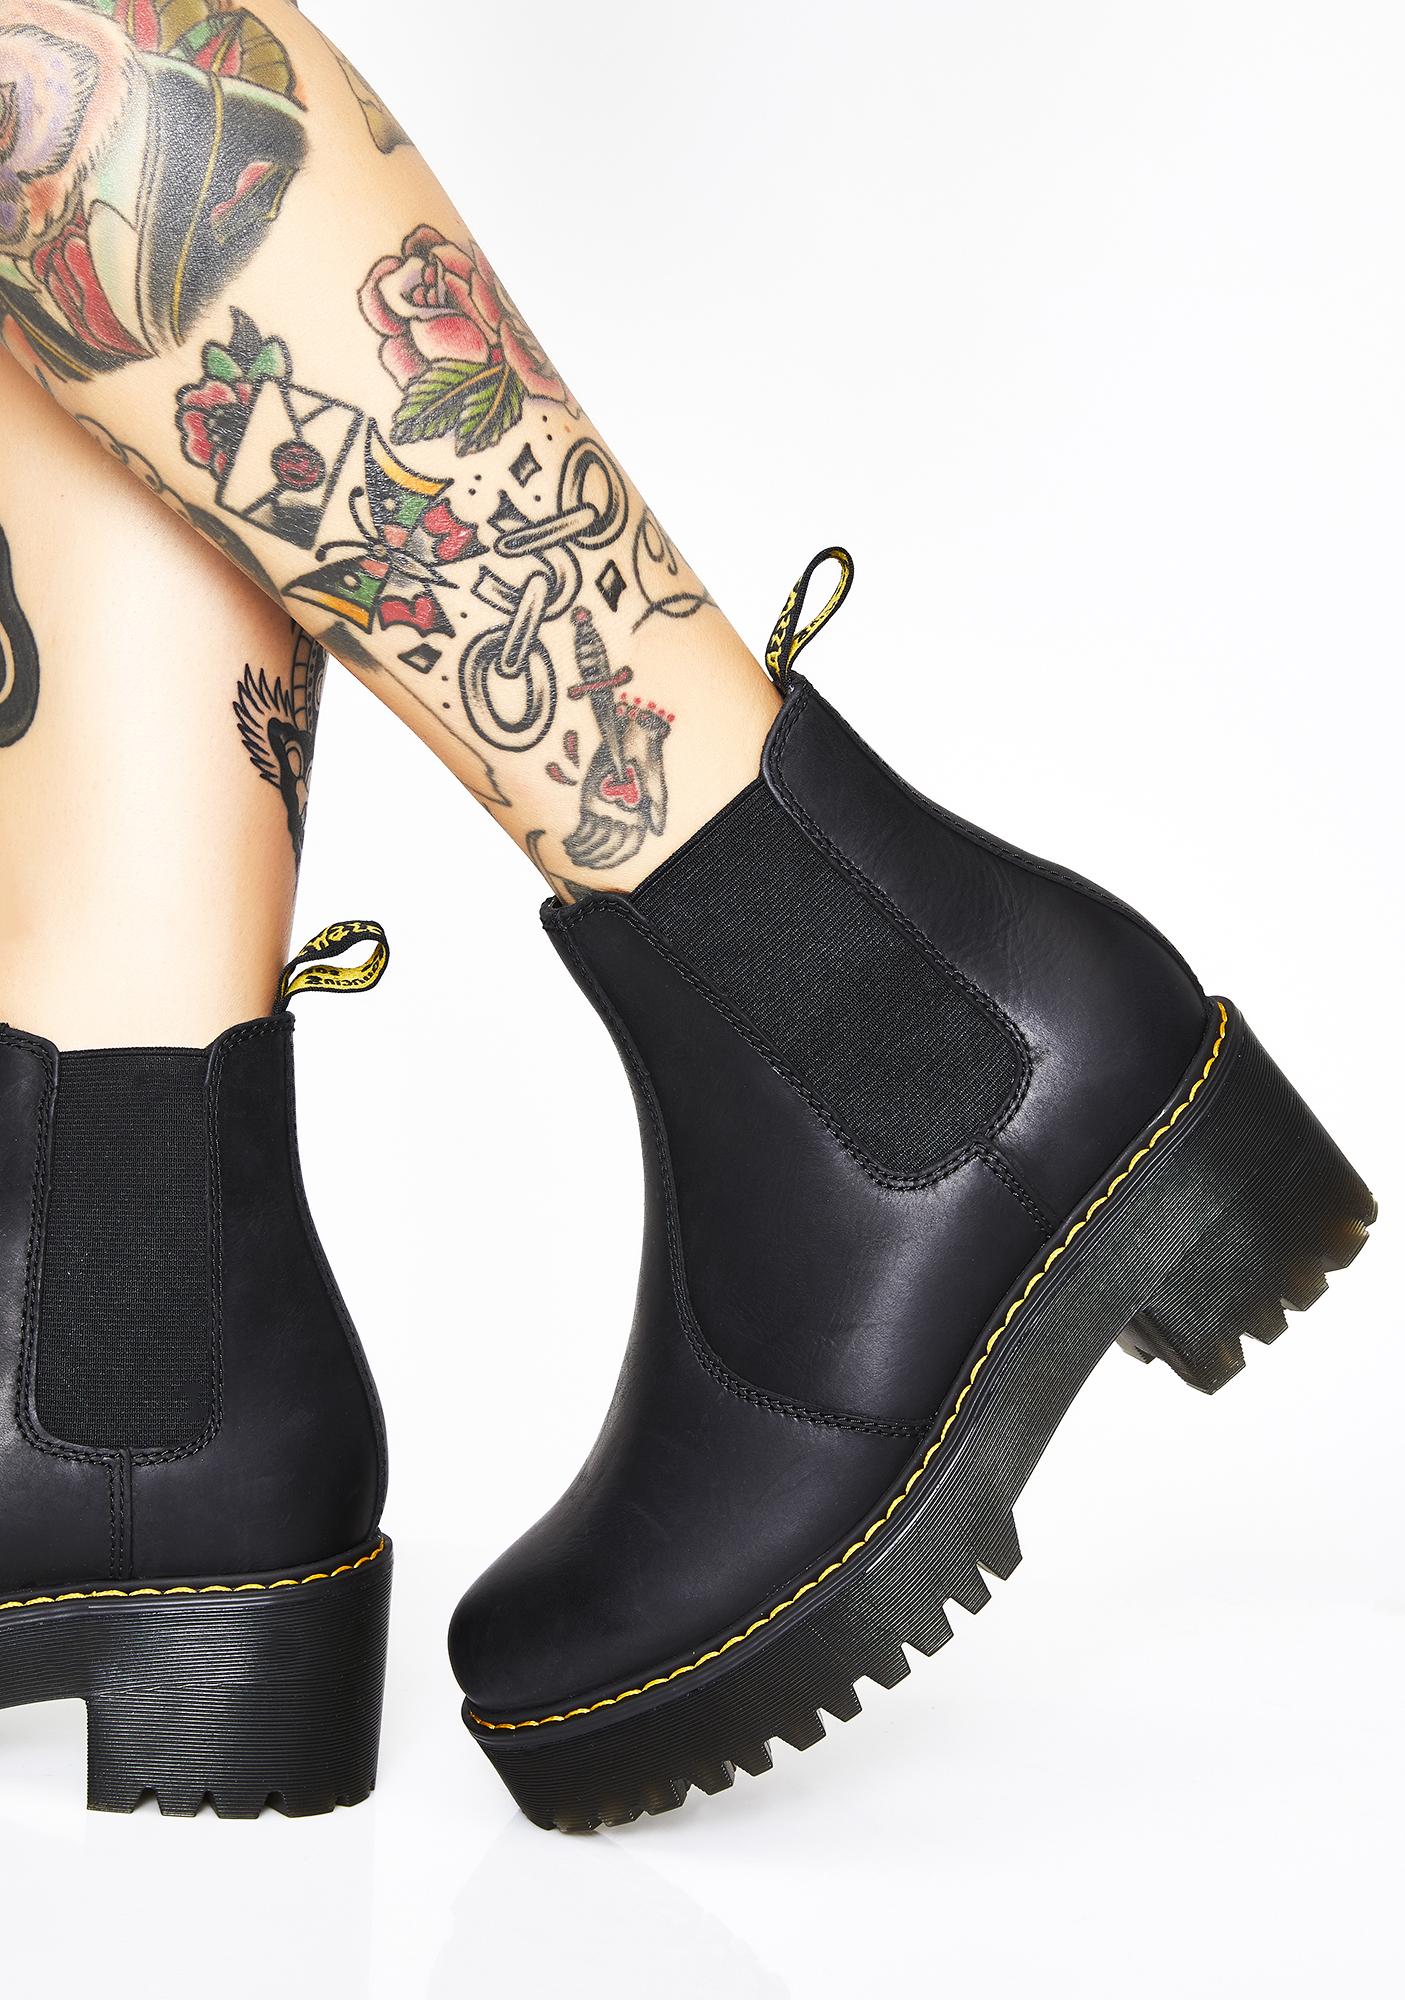 rometty boots dr martens